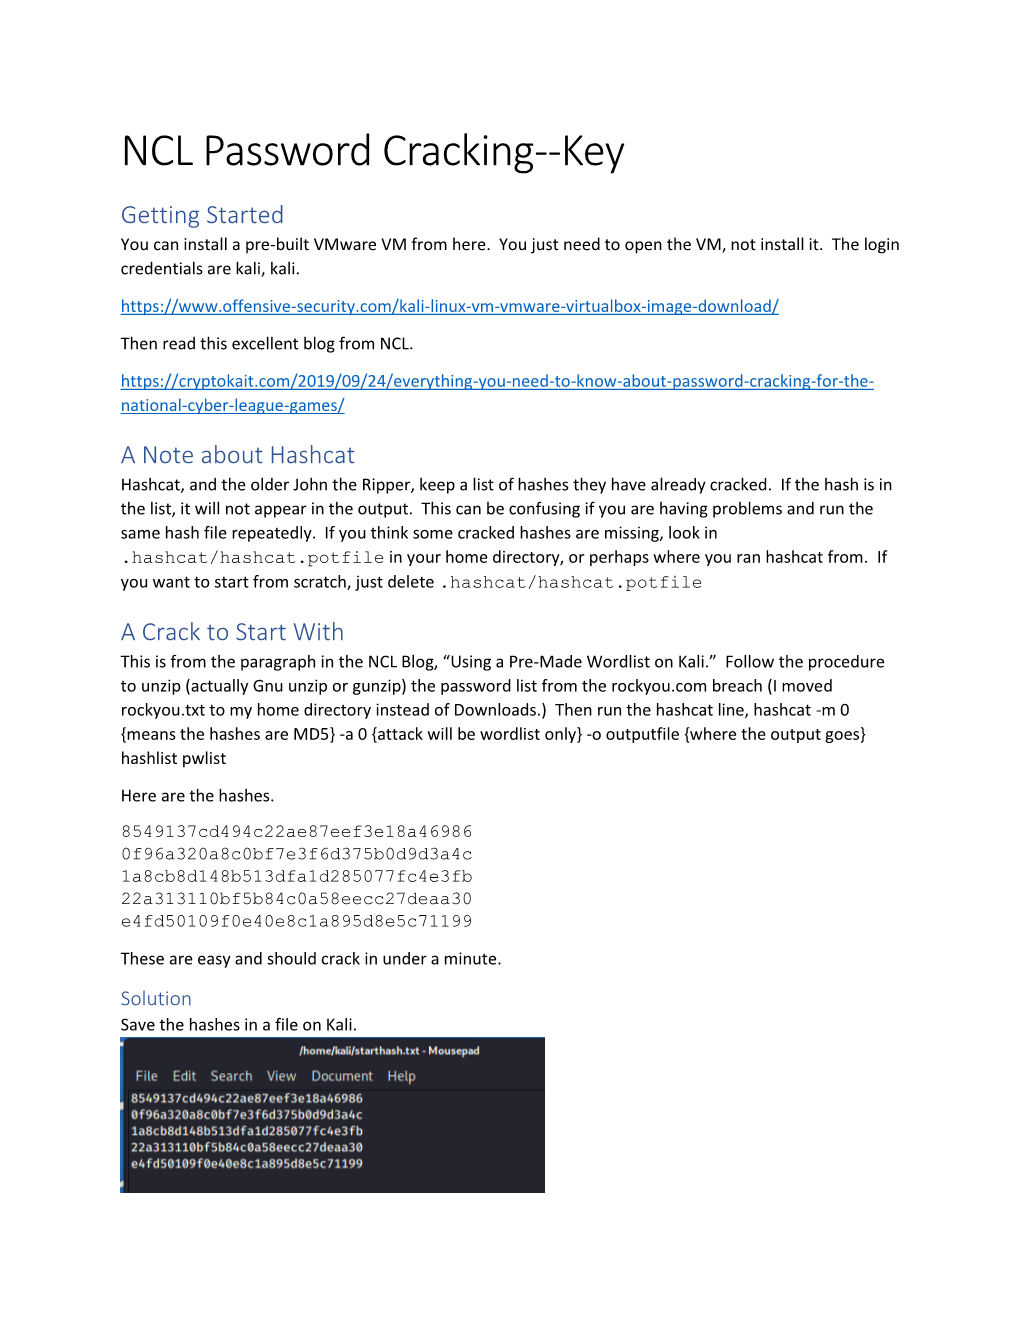 NCL Password Cracking--Key Getting Started You Can Install a Pre-Built Vmware VM from Here